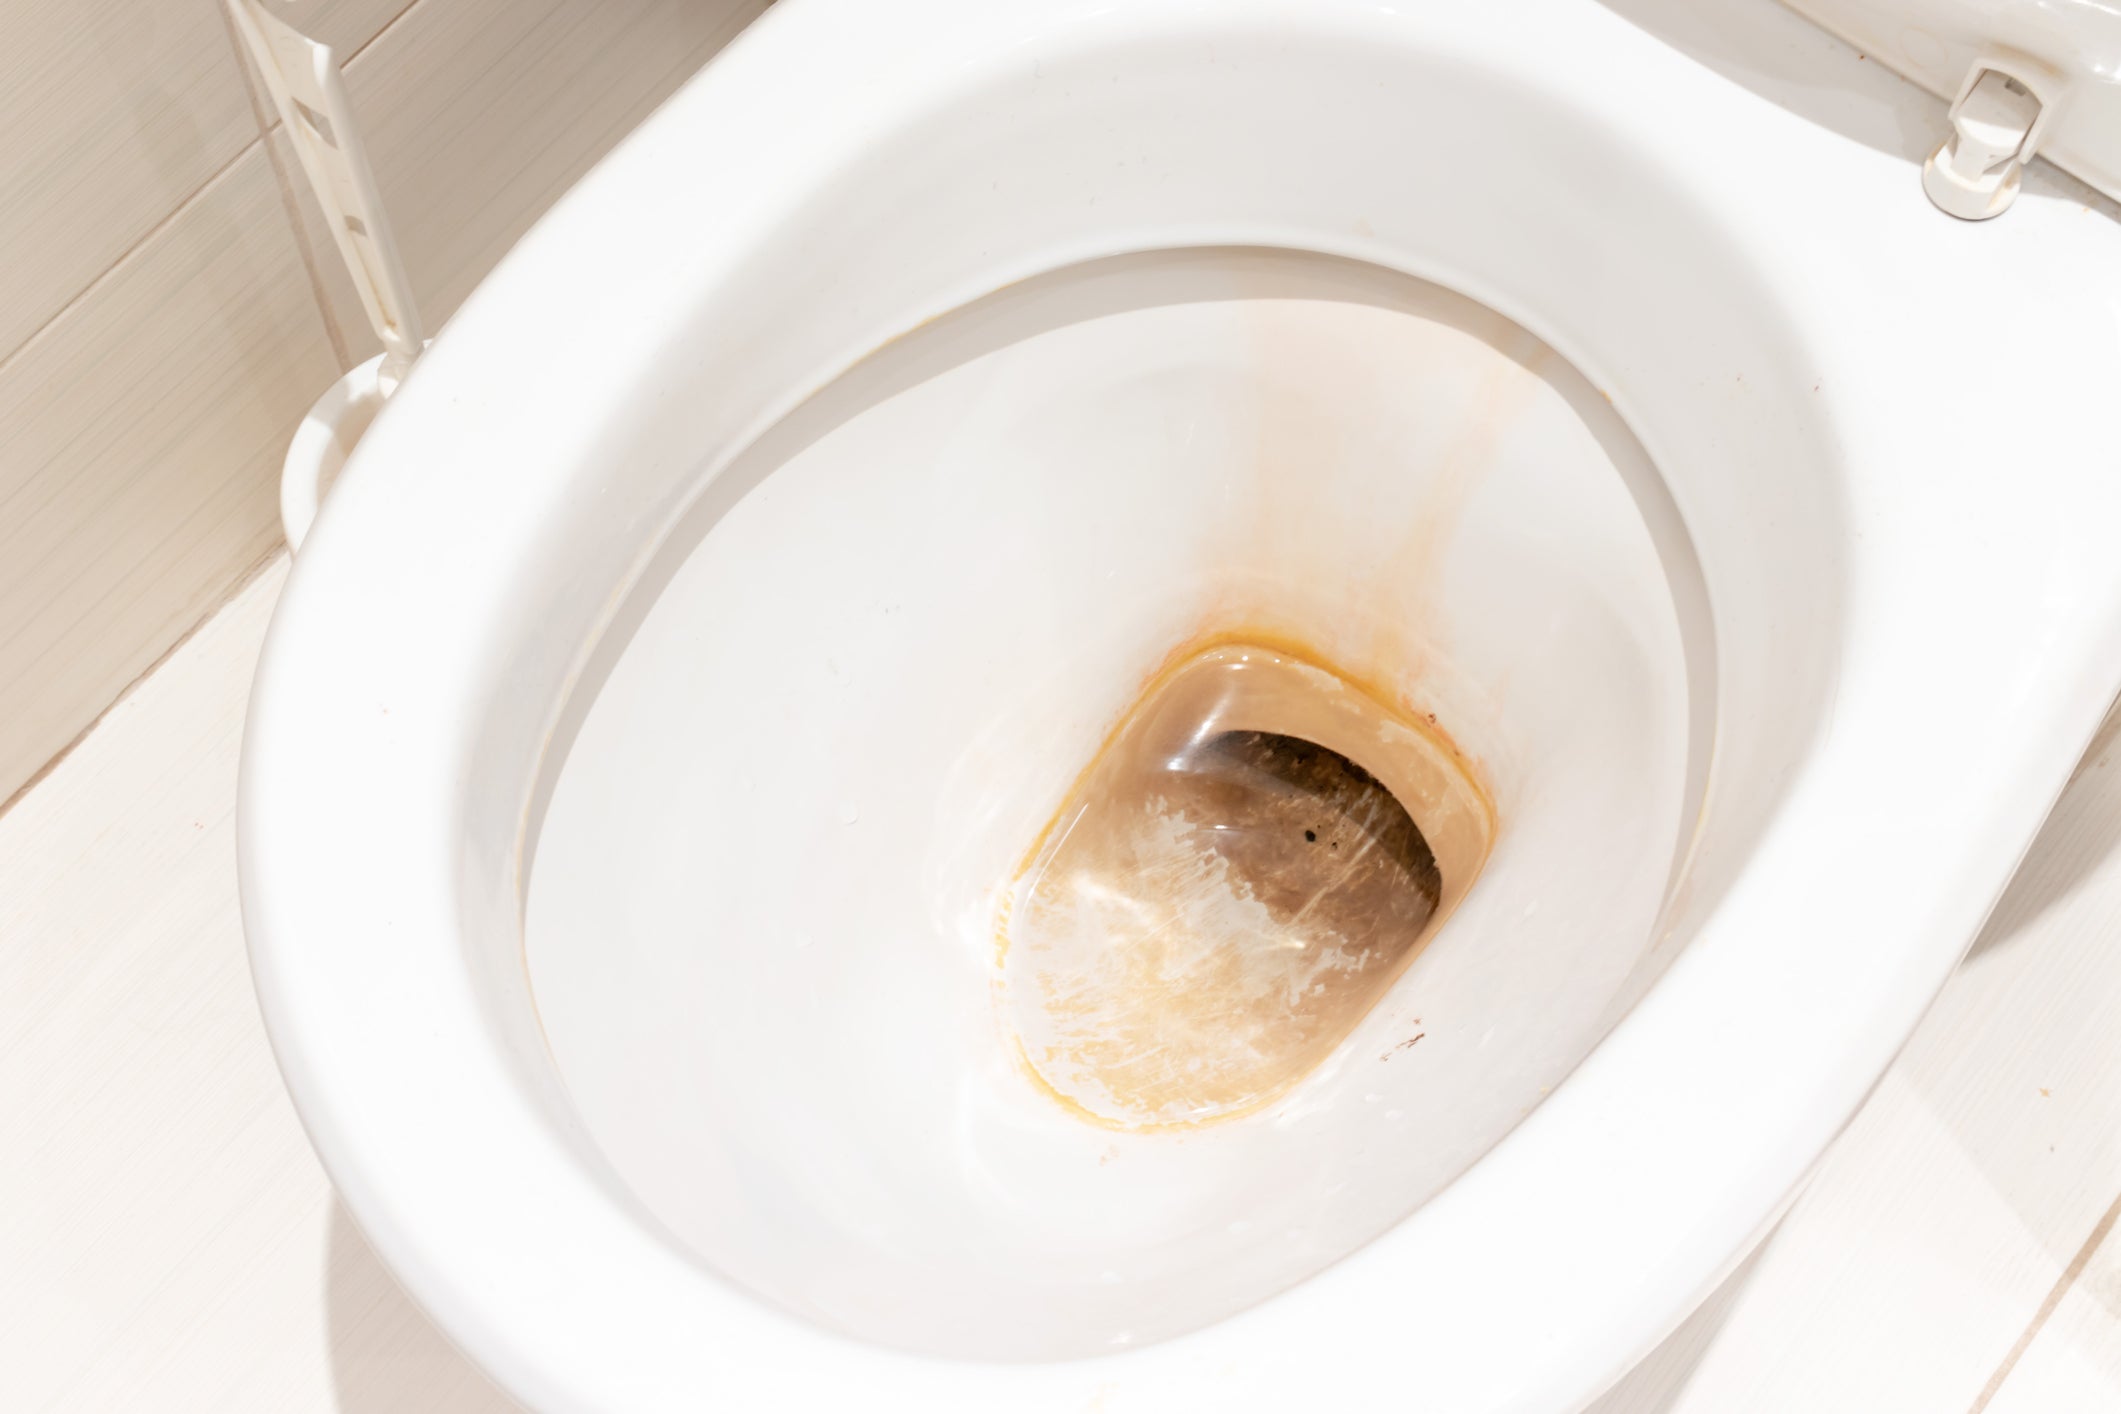 What causes toilet stains